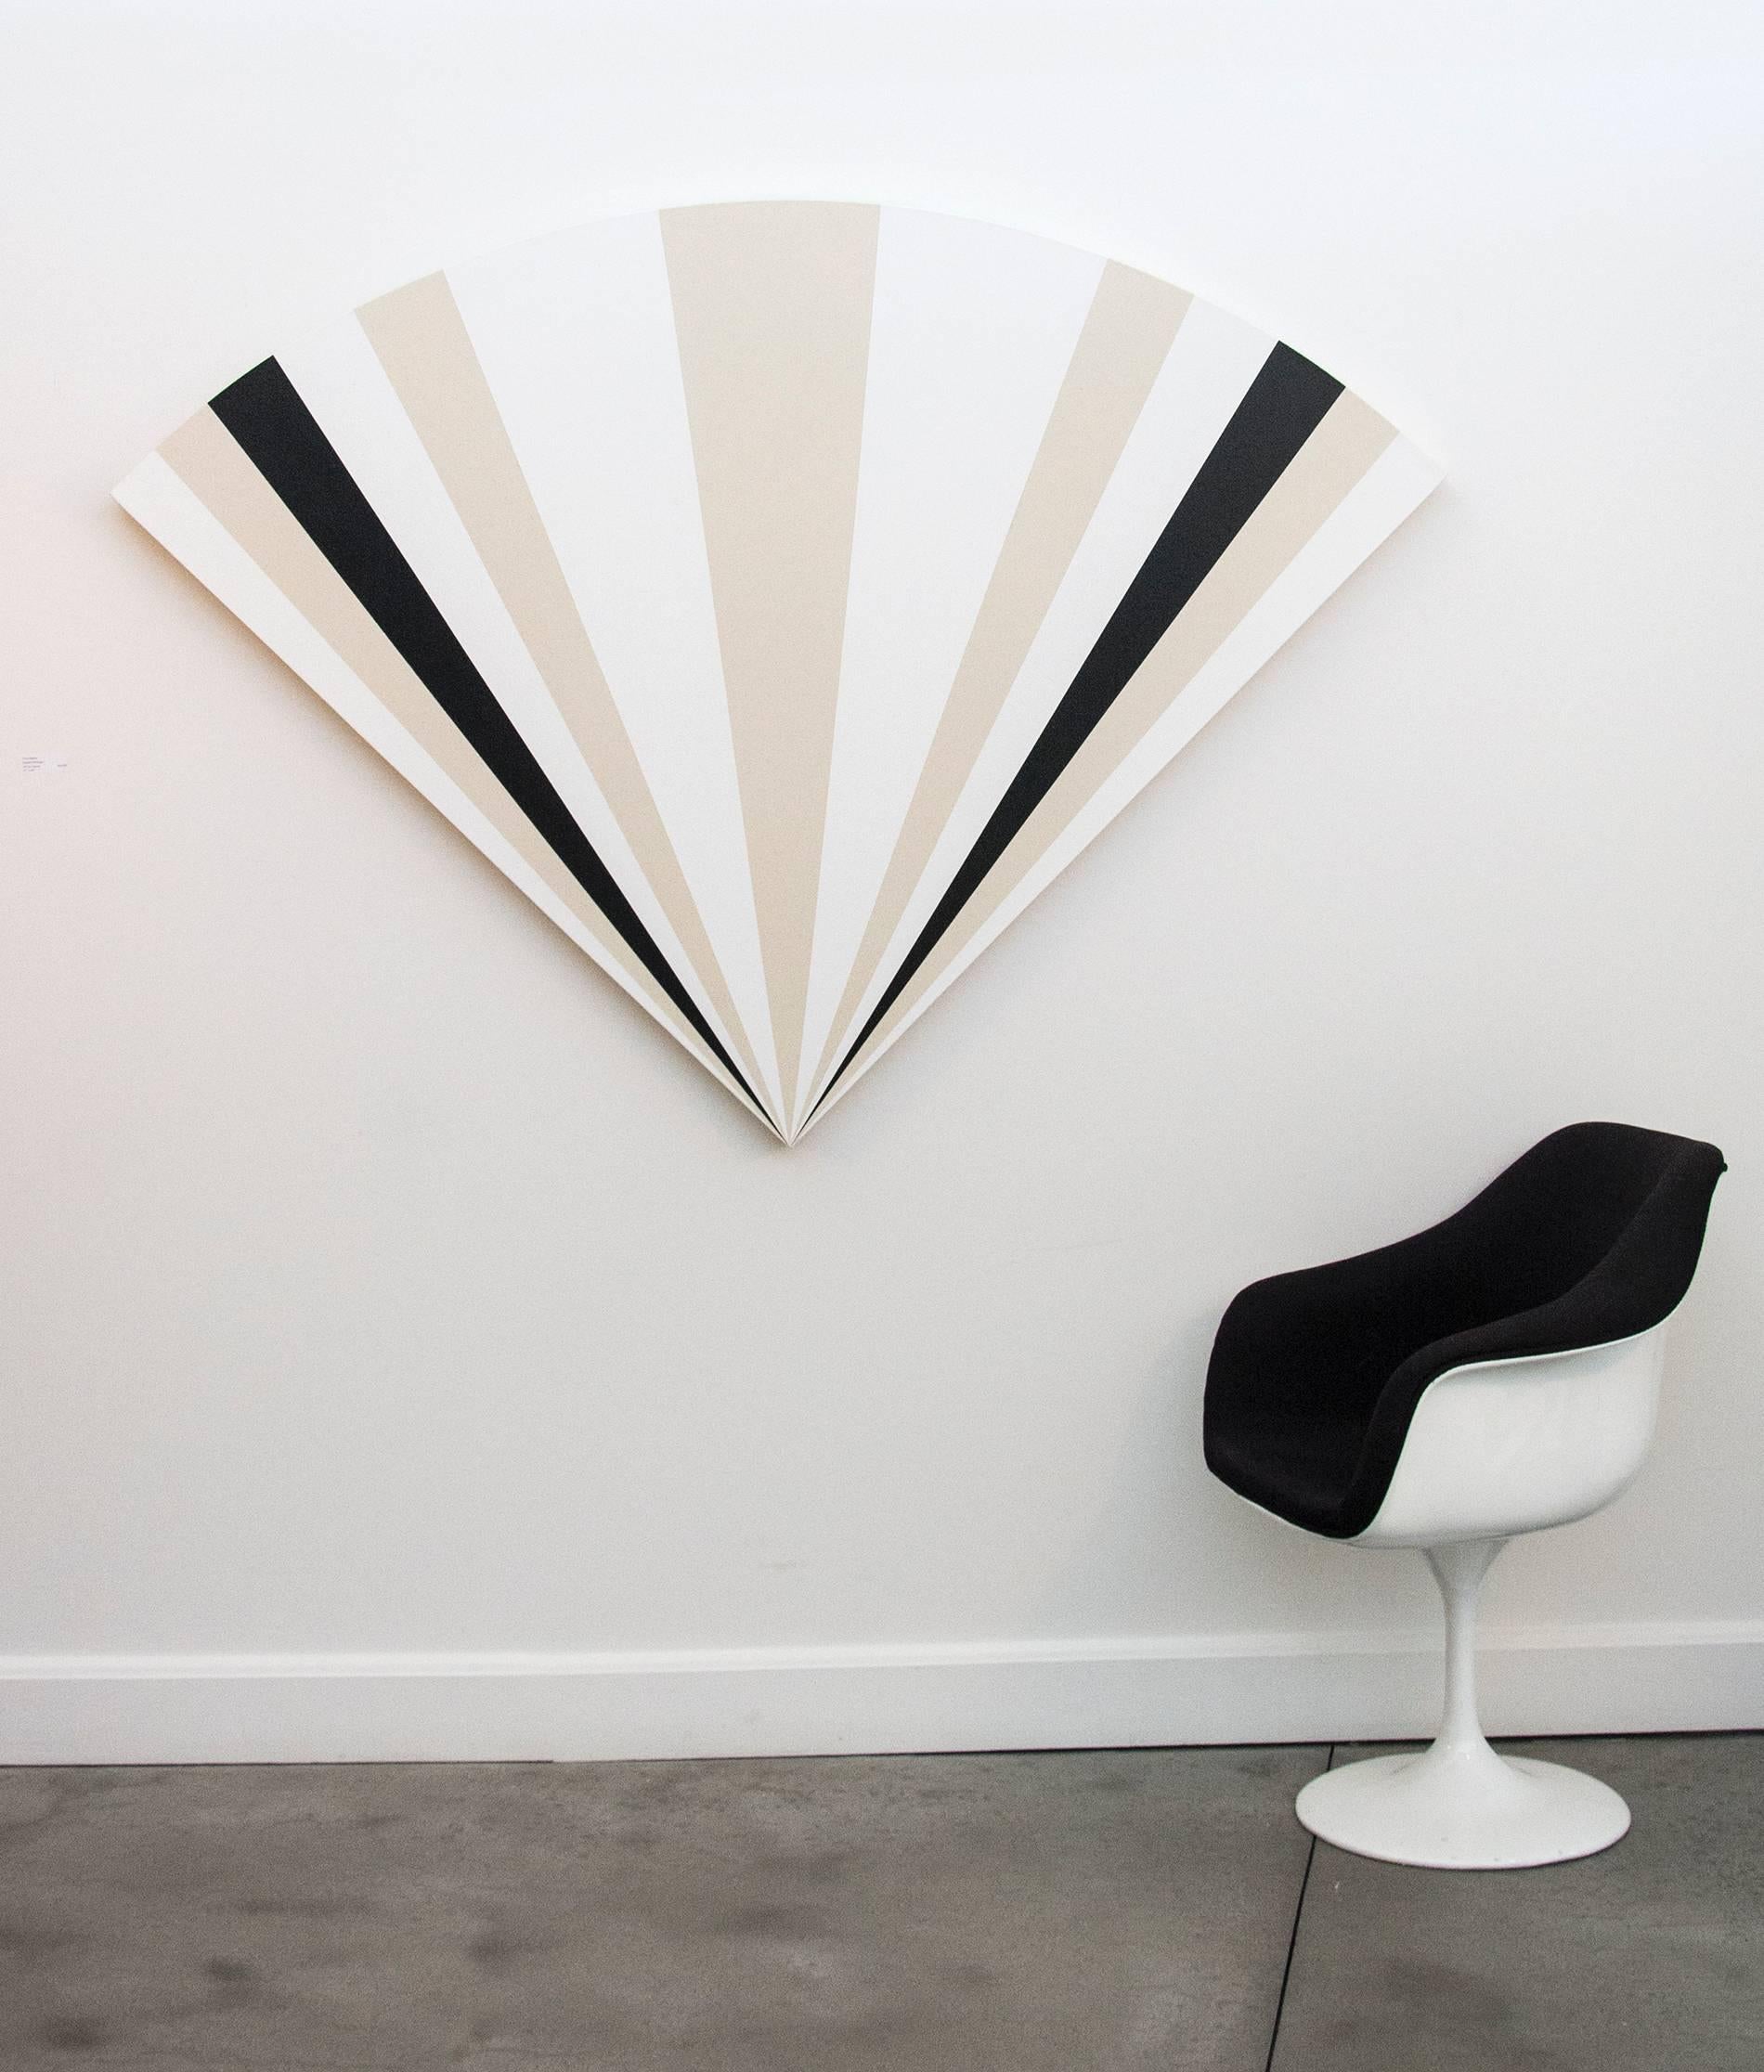 Fan with 1231212121321 - alternating black & white sequence in art deco style - Painting by Aron Hill